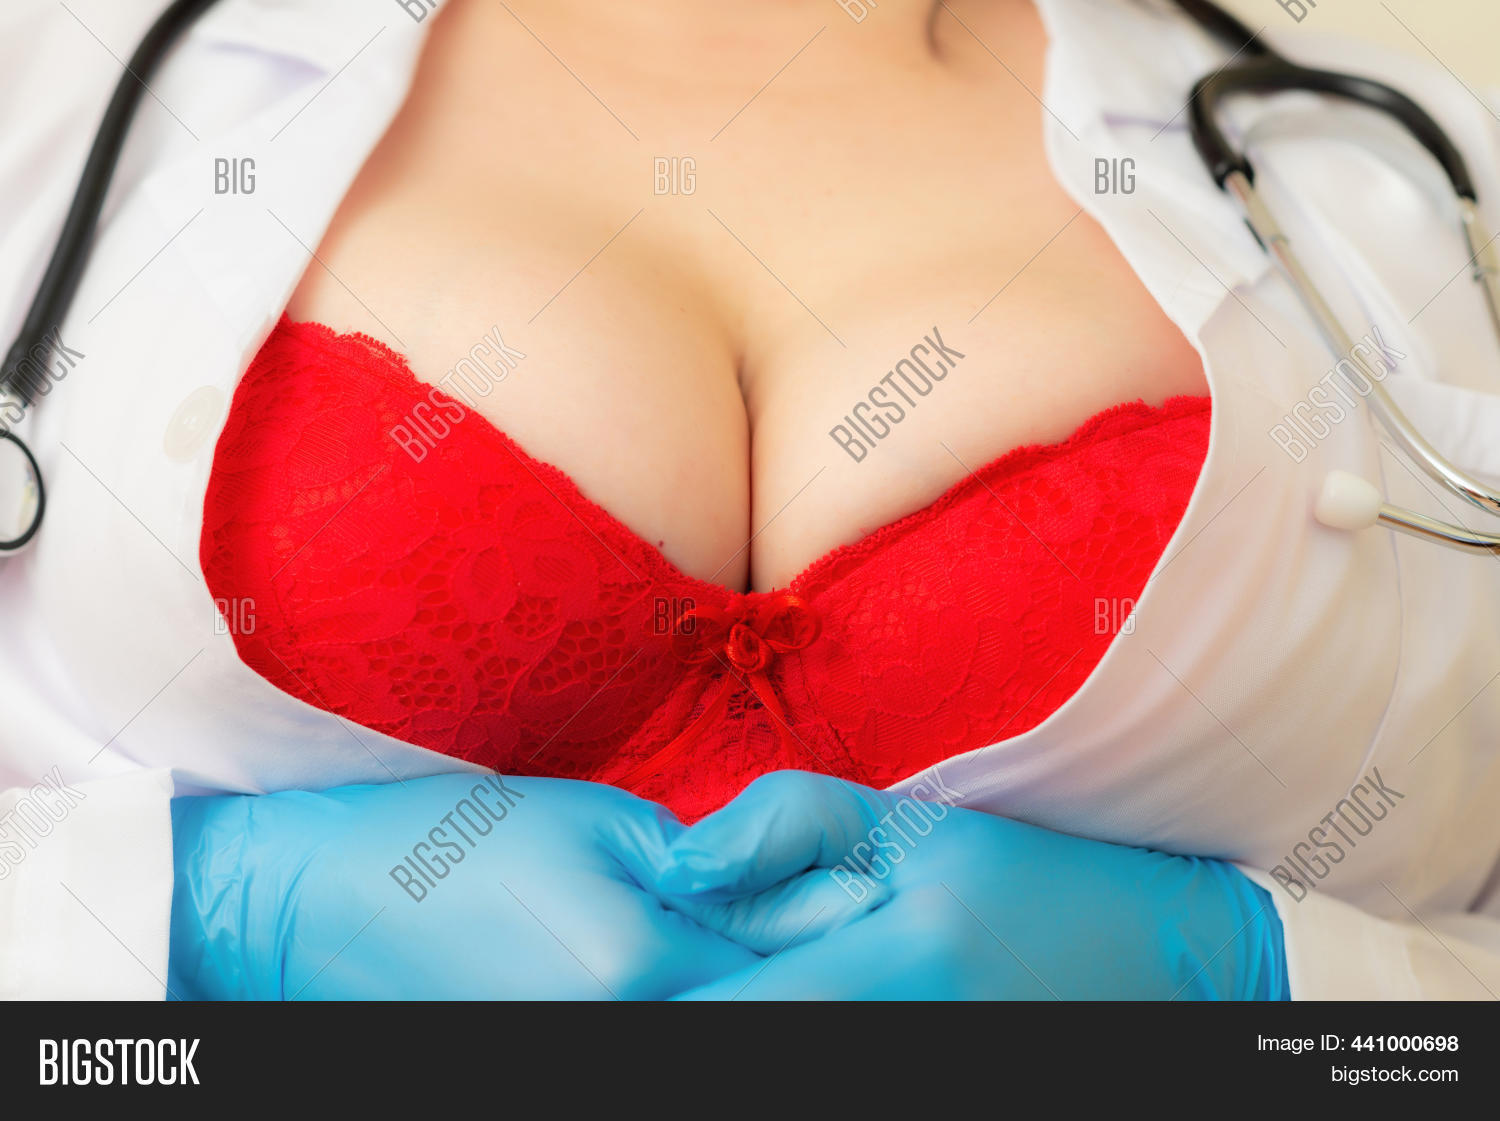 chad murren recommends hot nurses with big boobs pic